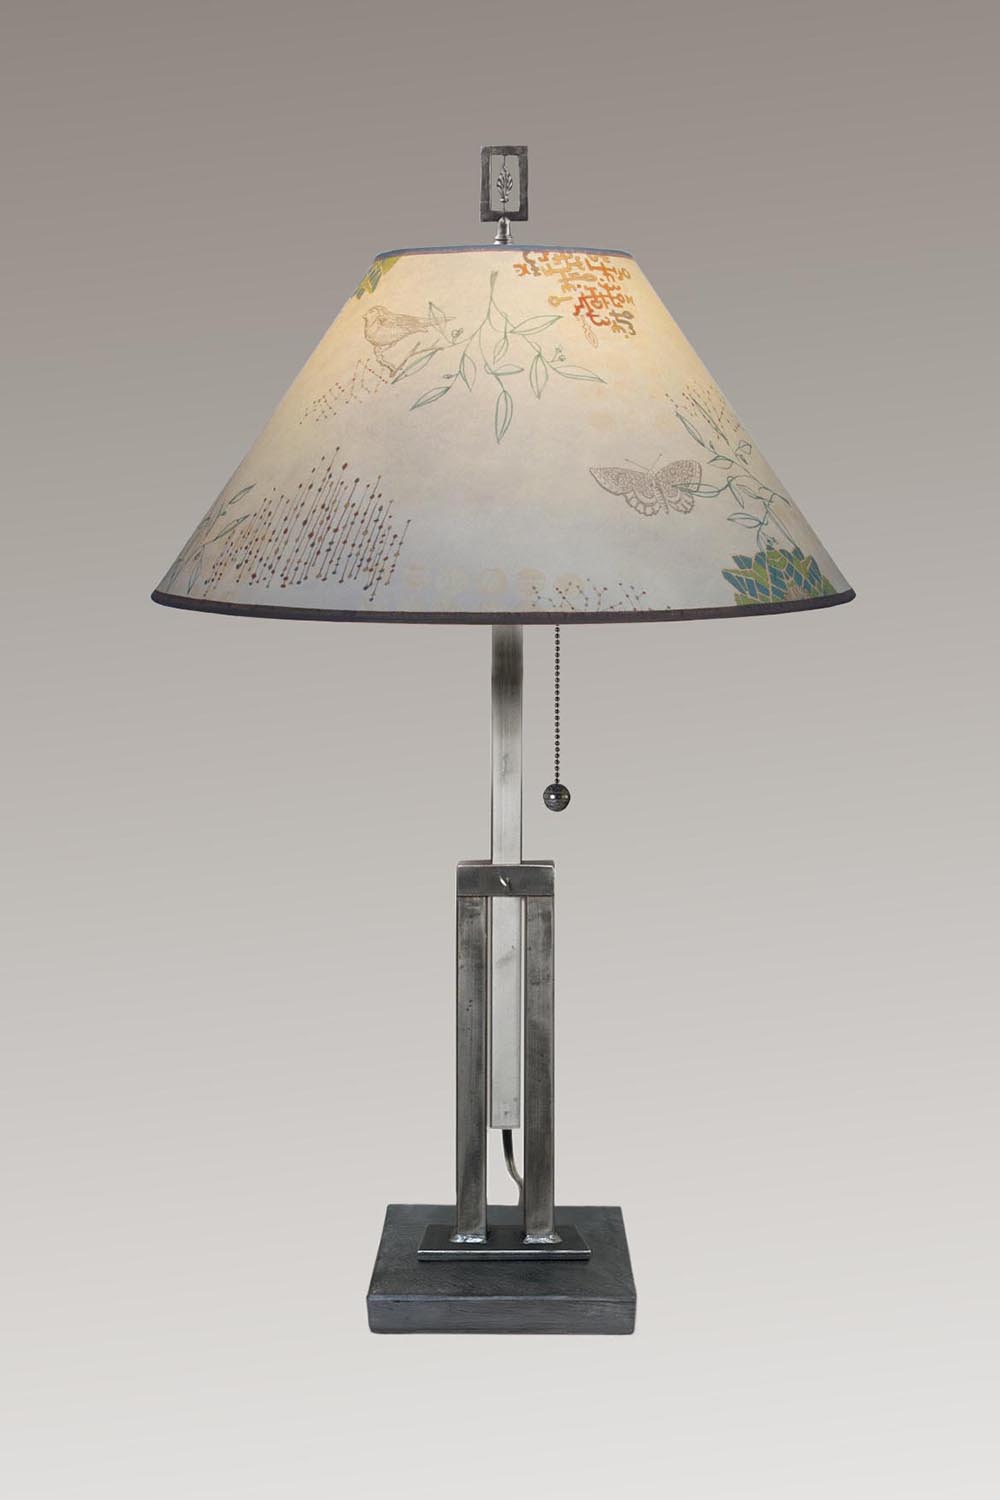 Adjustable-Height Steel Table Lamp with Large Conical Shade in Ecru Journey